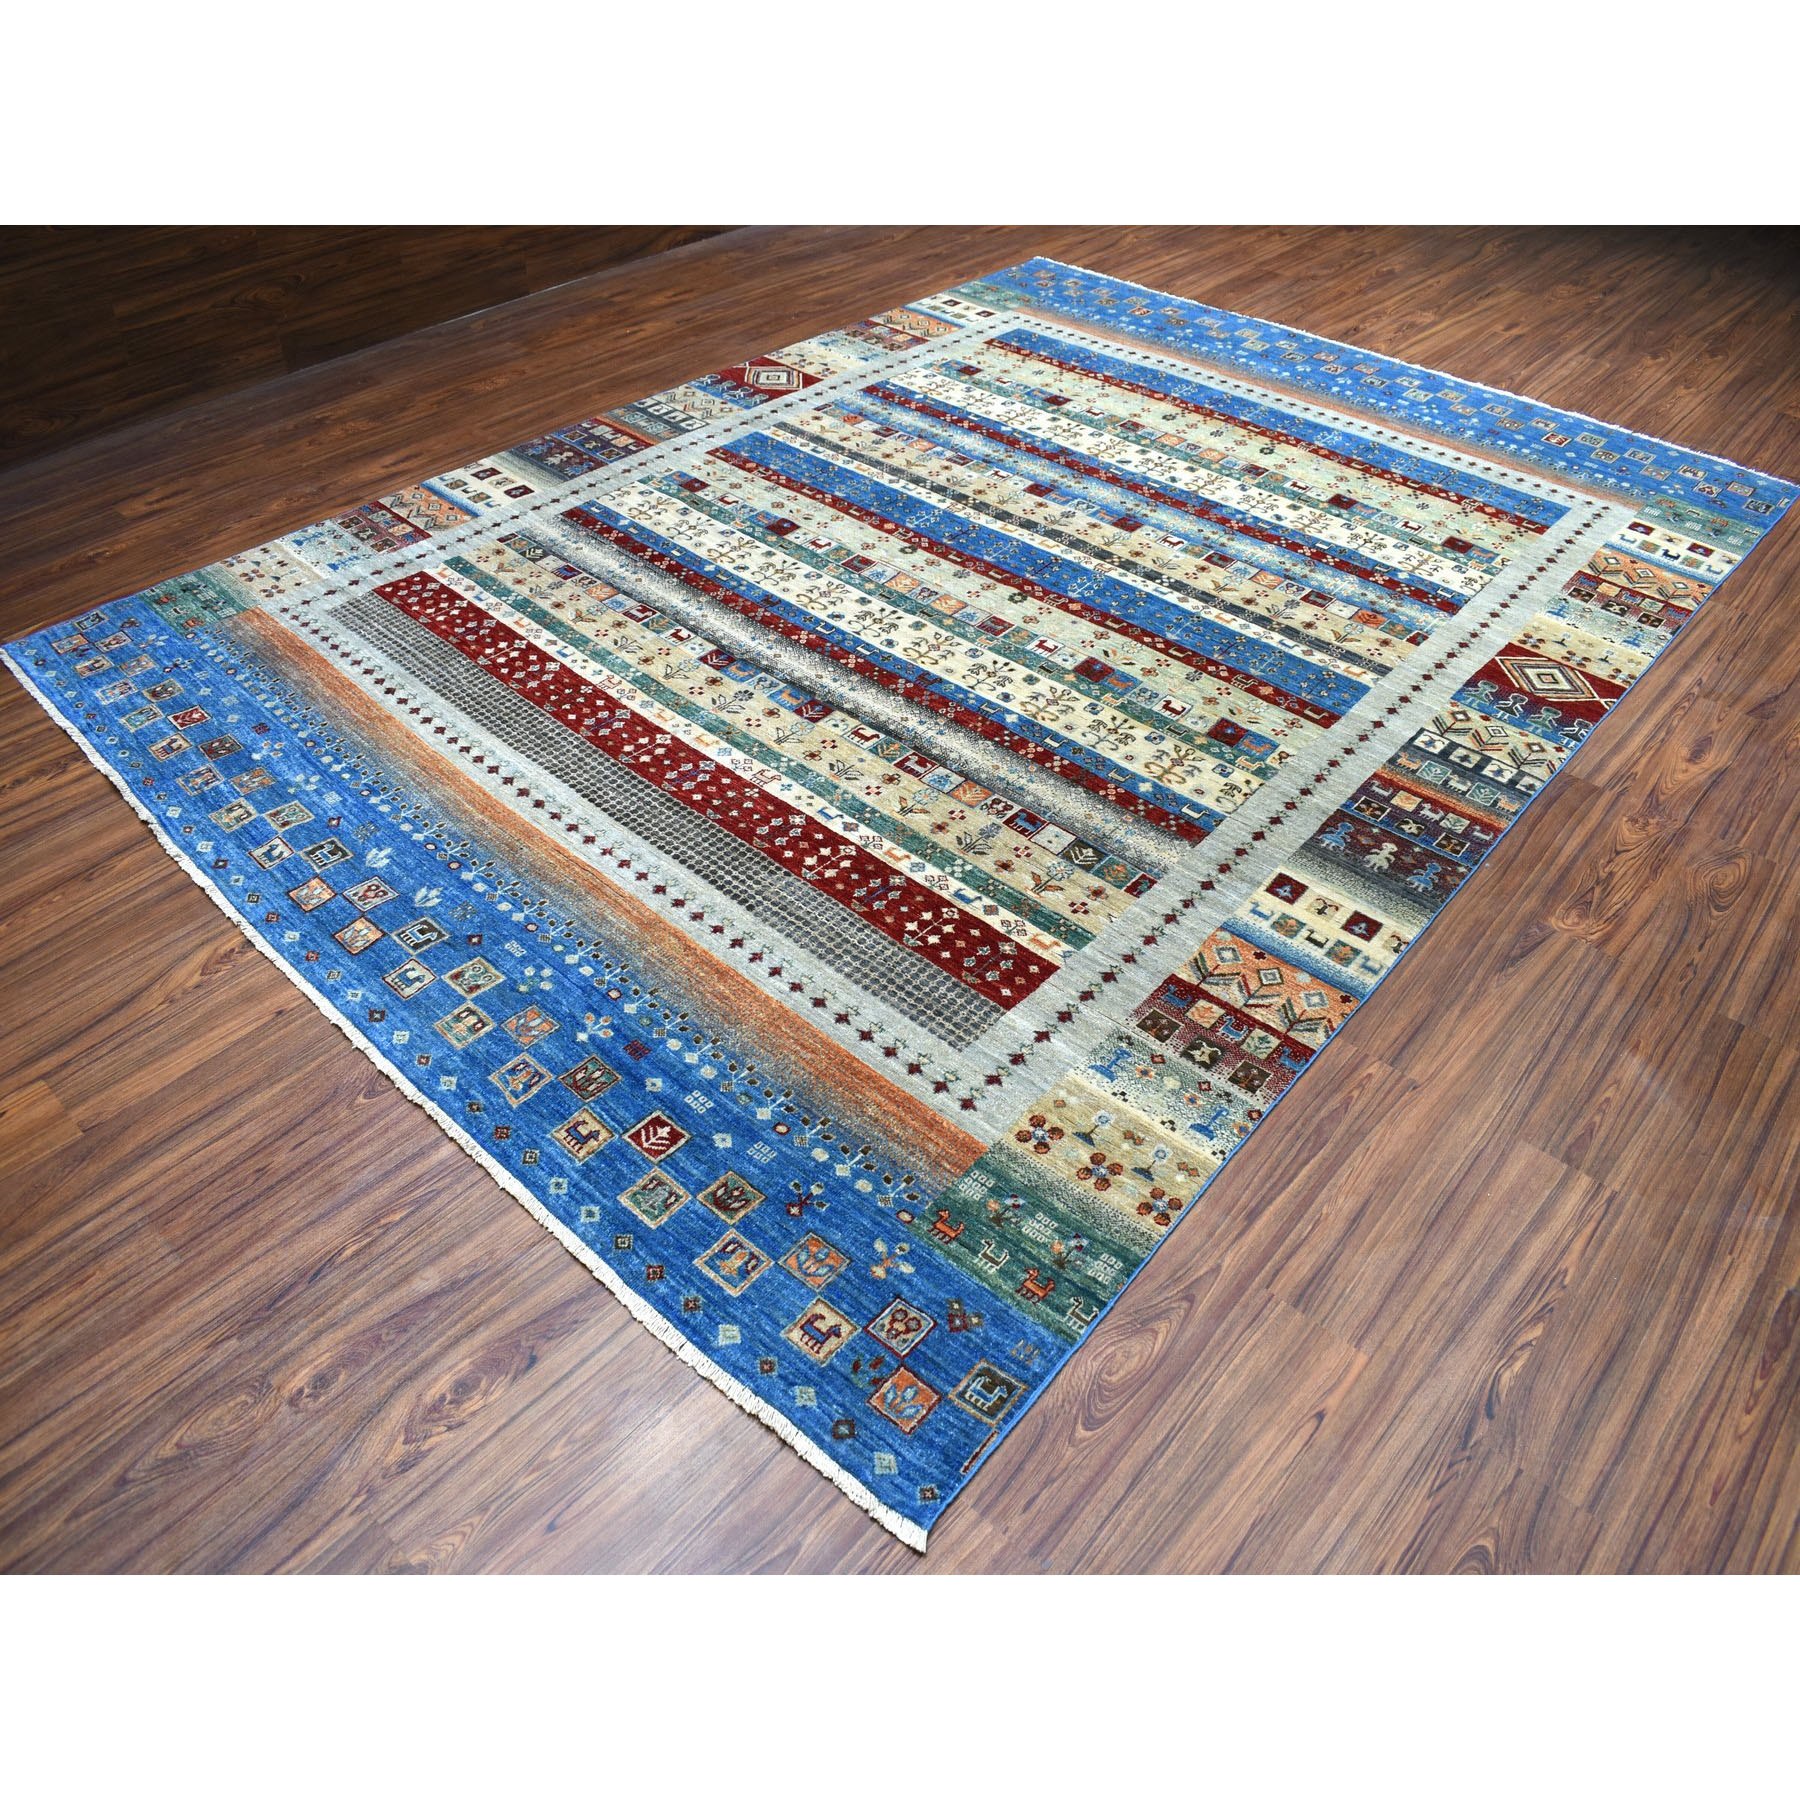 8'8"x12' Blue Kashkuli Gabbeh Pictorial Pure wool Hand-knotted Oriental Rug 